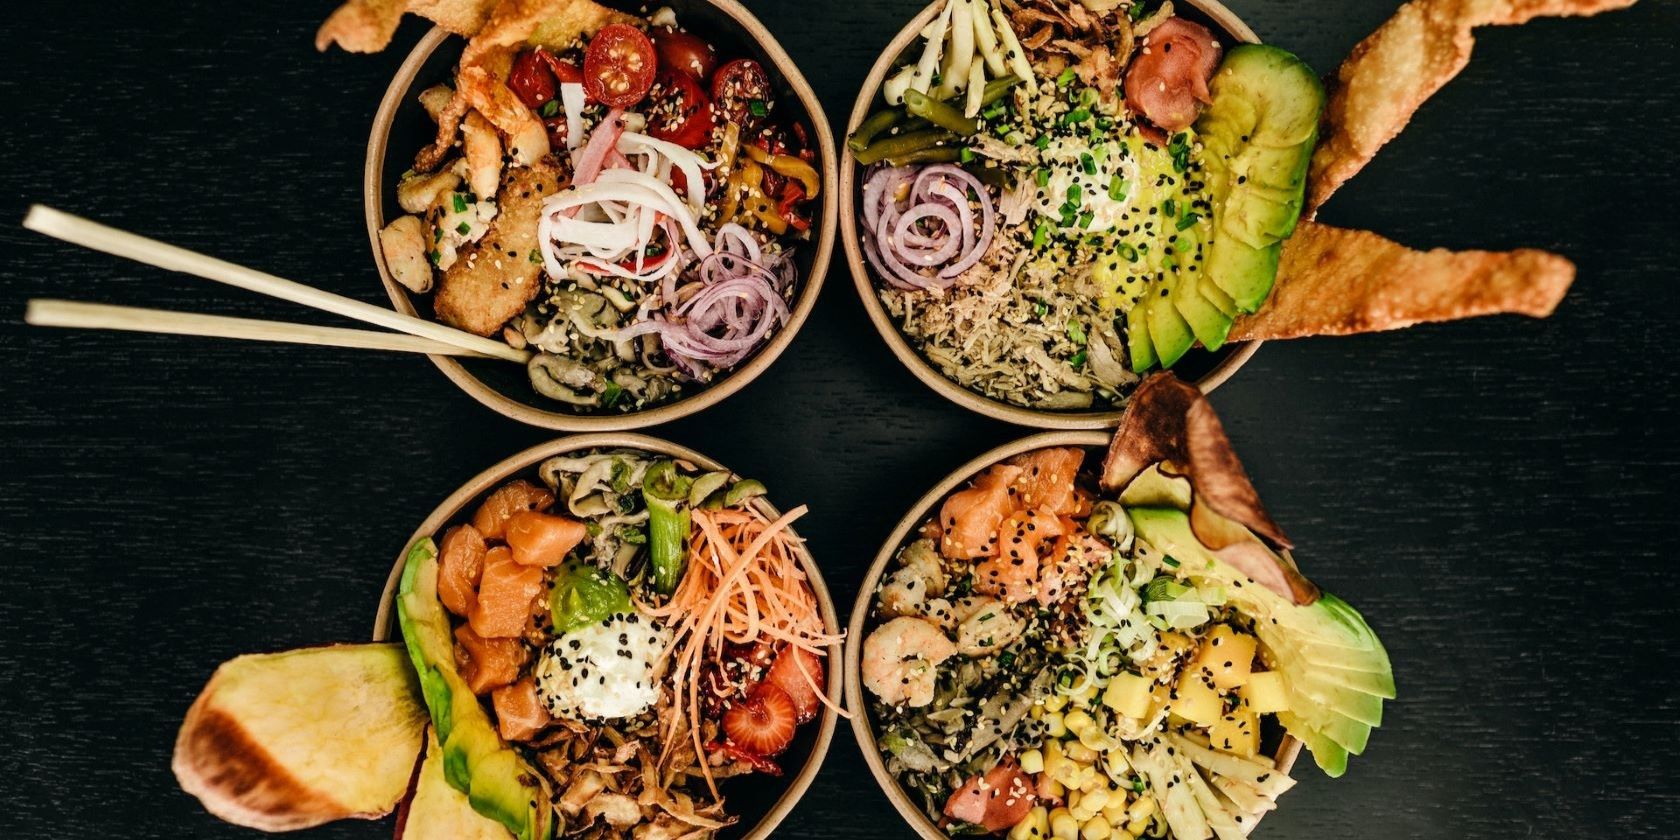 food served in 4 bowls